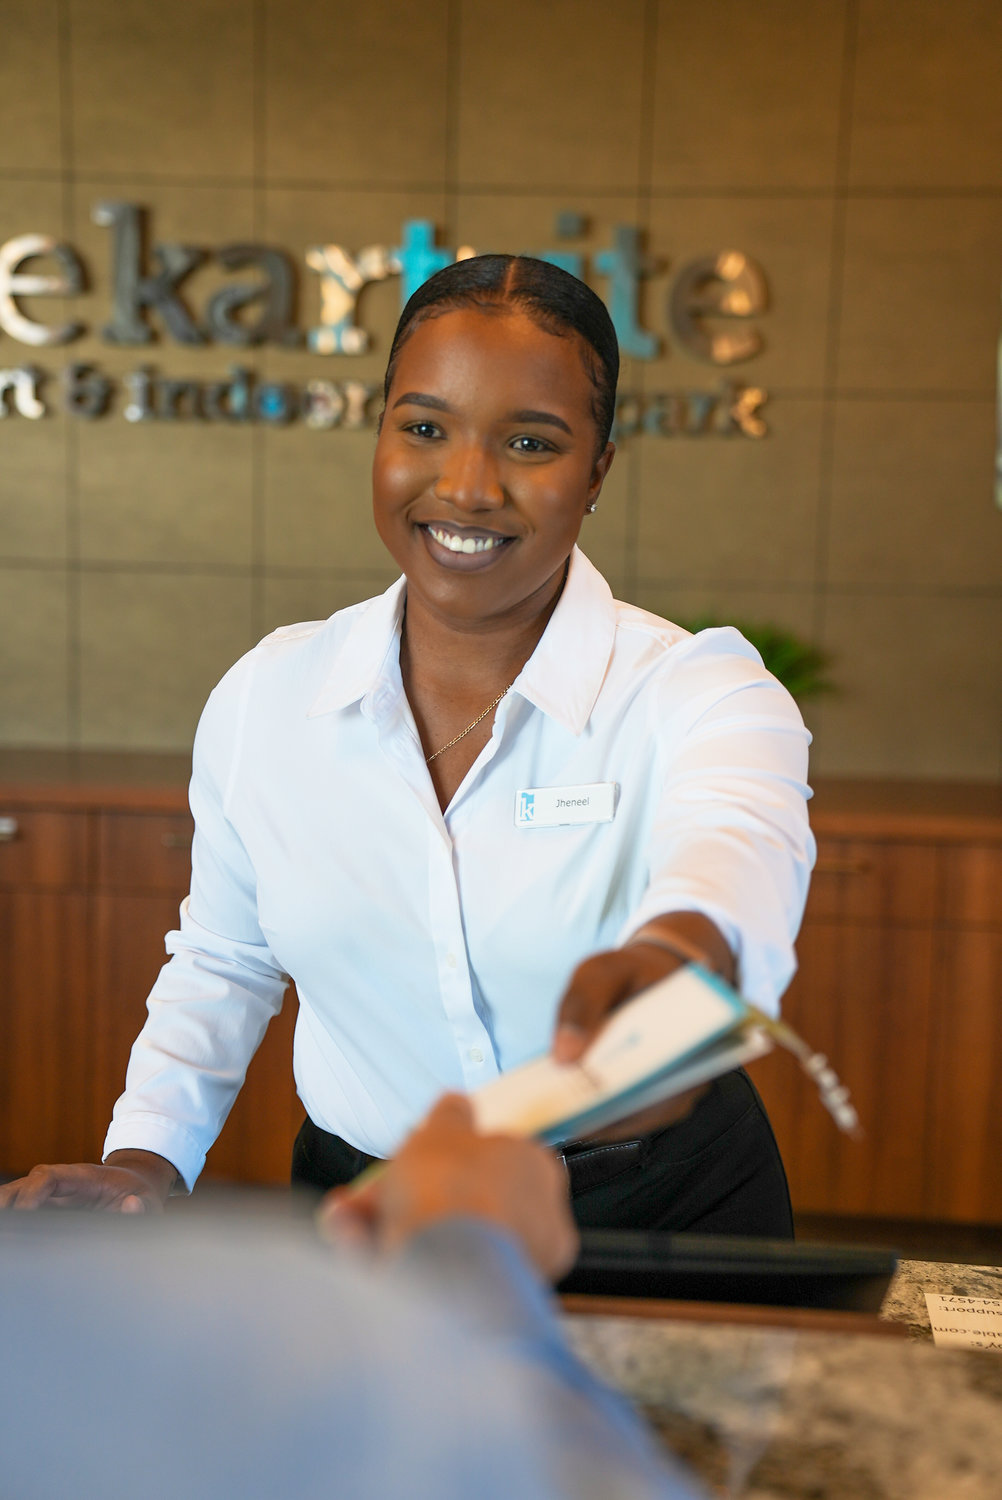 Jheneel Burkley, the Front Office Manager at The Kartrite Resort and Indoor Waterpark, is recognized for her hospitality.